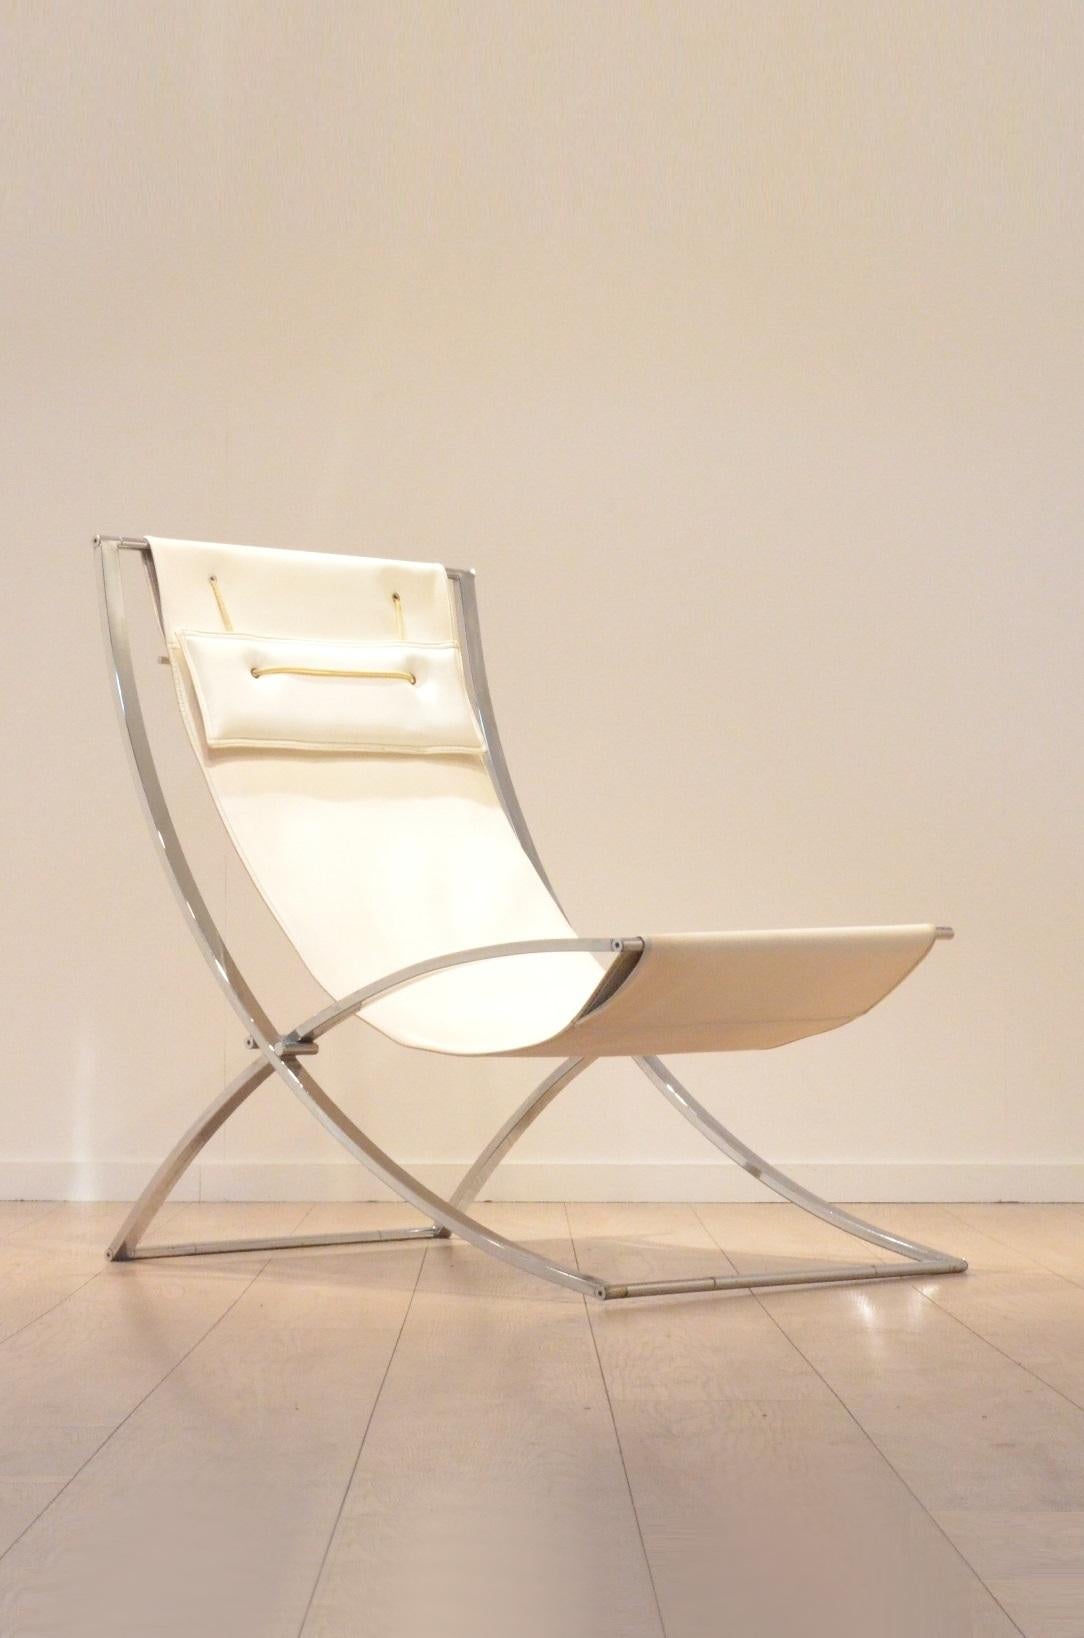 Lounge chair ‘Luisa’ designed by the Italian architect Marcello Cuneo, circa 1972.
Chromium metal frame with skai upholstery.